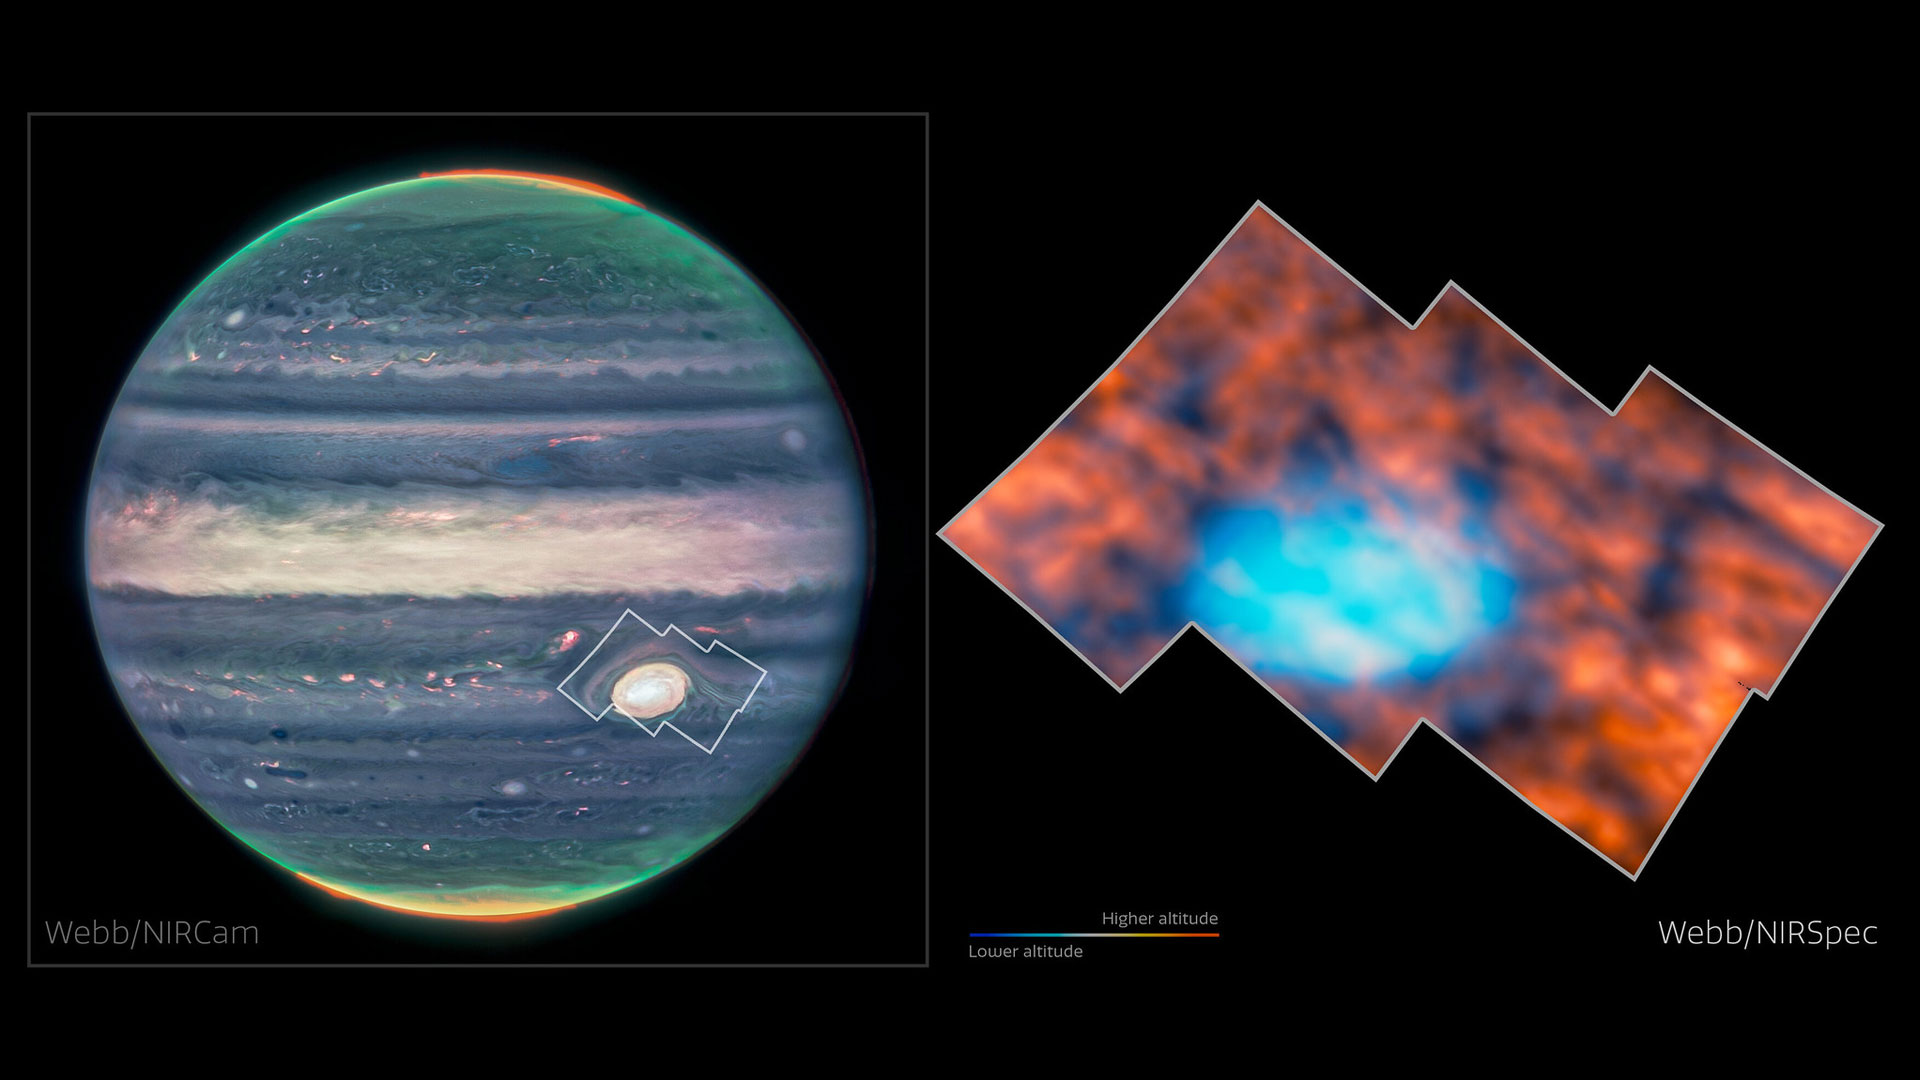 New observations of the Great Red Spot on Jupiter have revealed that the planet’s atmosphere above and around the infamous storm is surprisingly interesting and active. This graphic shows the region observed by Webb — first its location on a NIRCam image of the whole planet (left), and the region itself (right), imaged by Webb’s Near-InfraRed Spectrograph (NIRSpec).